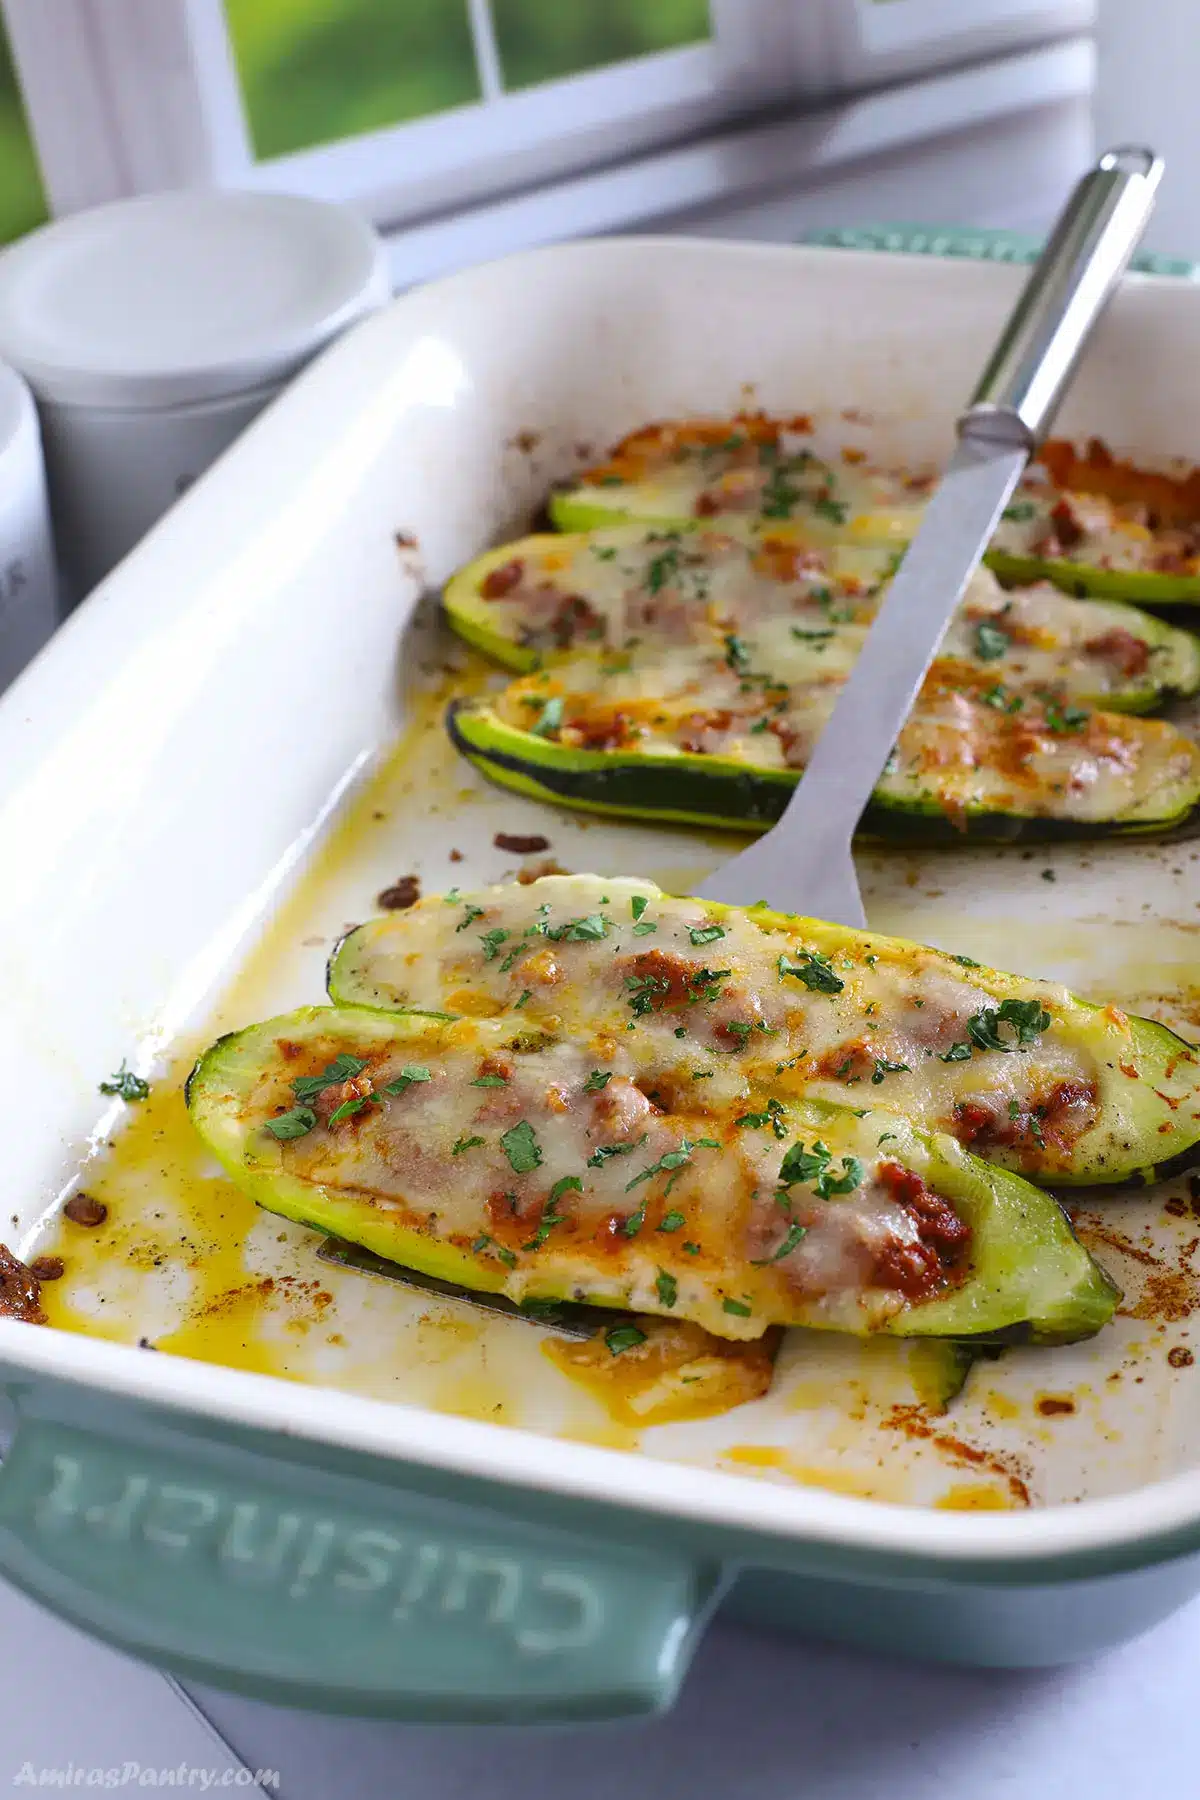 A serving spoon with zucchini boates being lifted from the casserole.